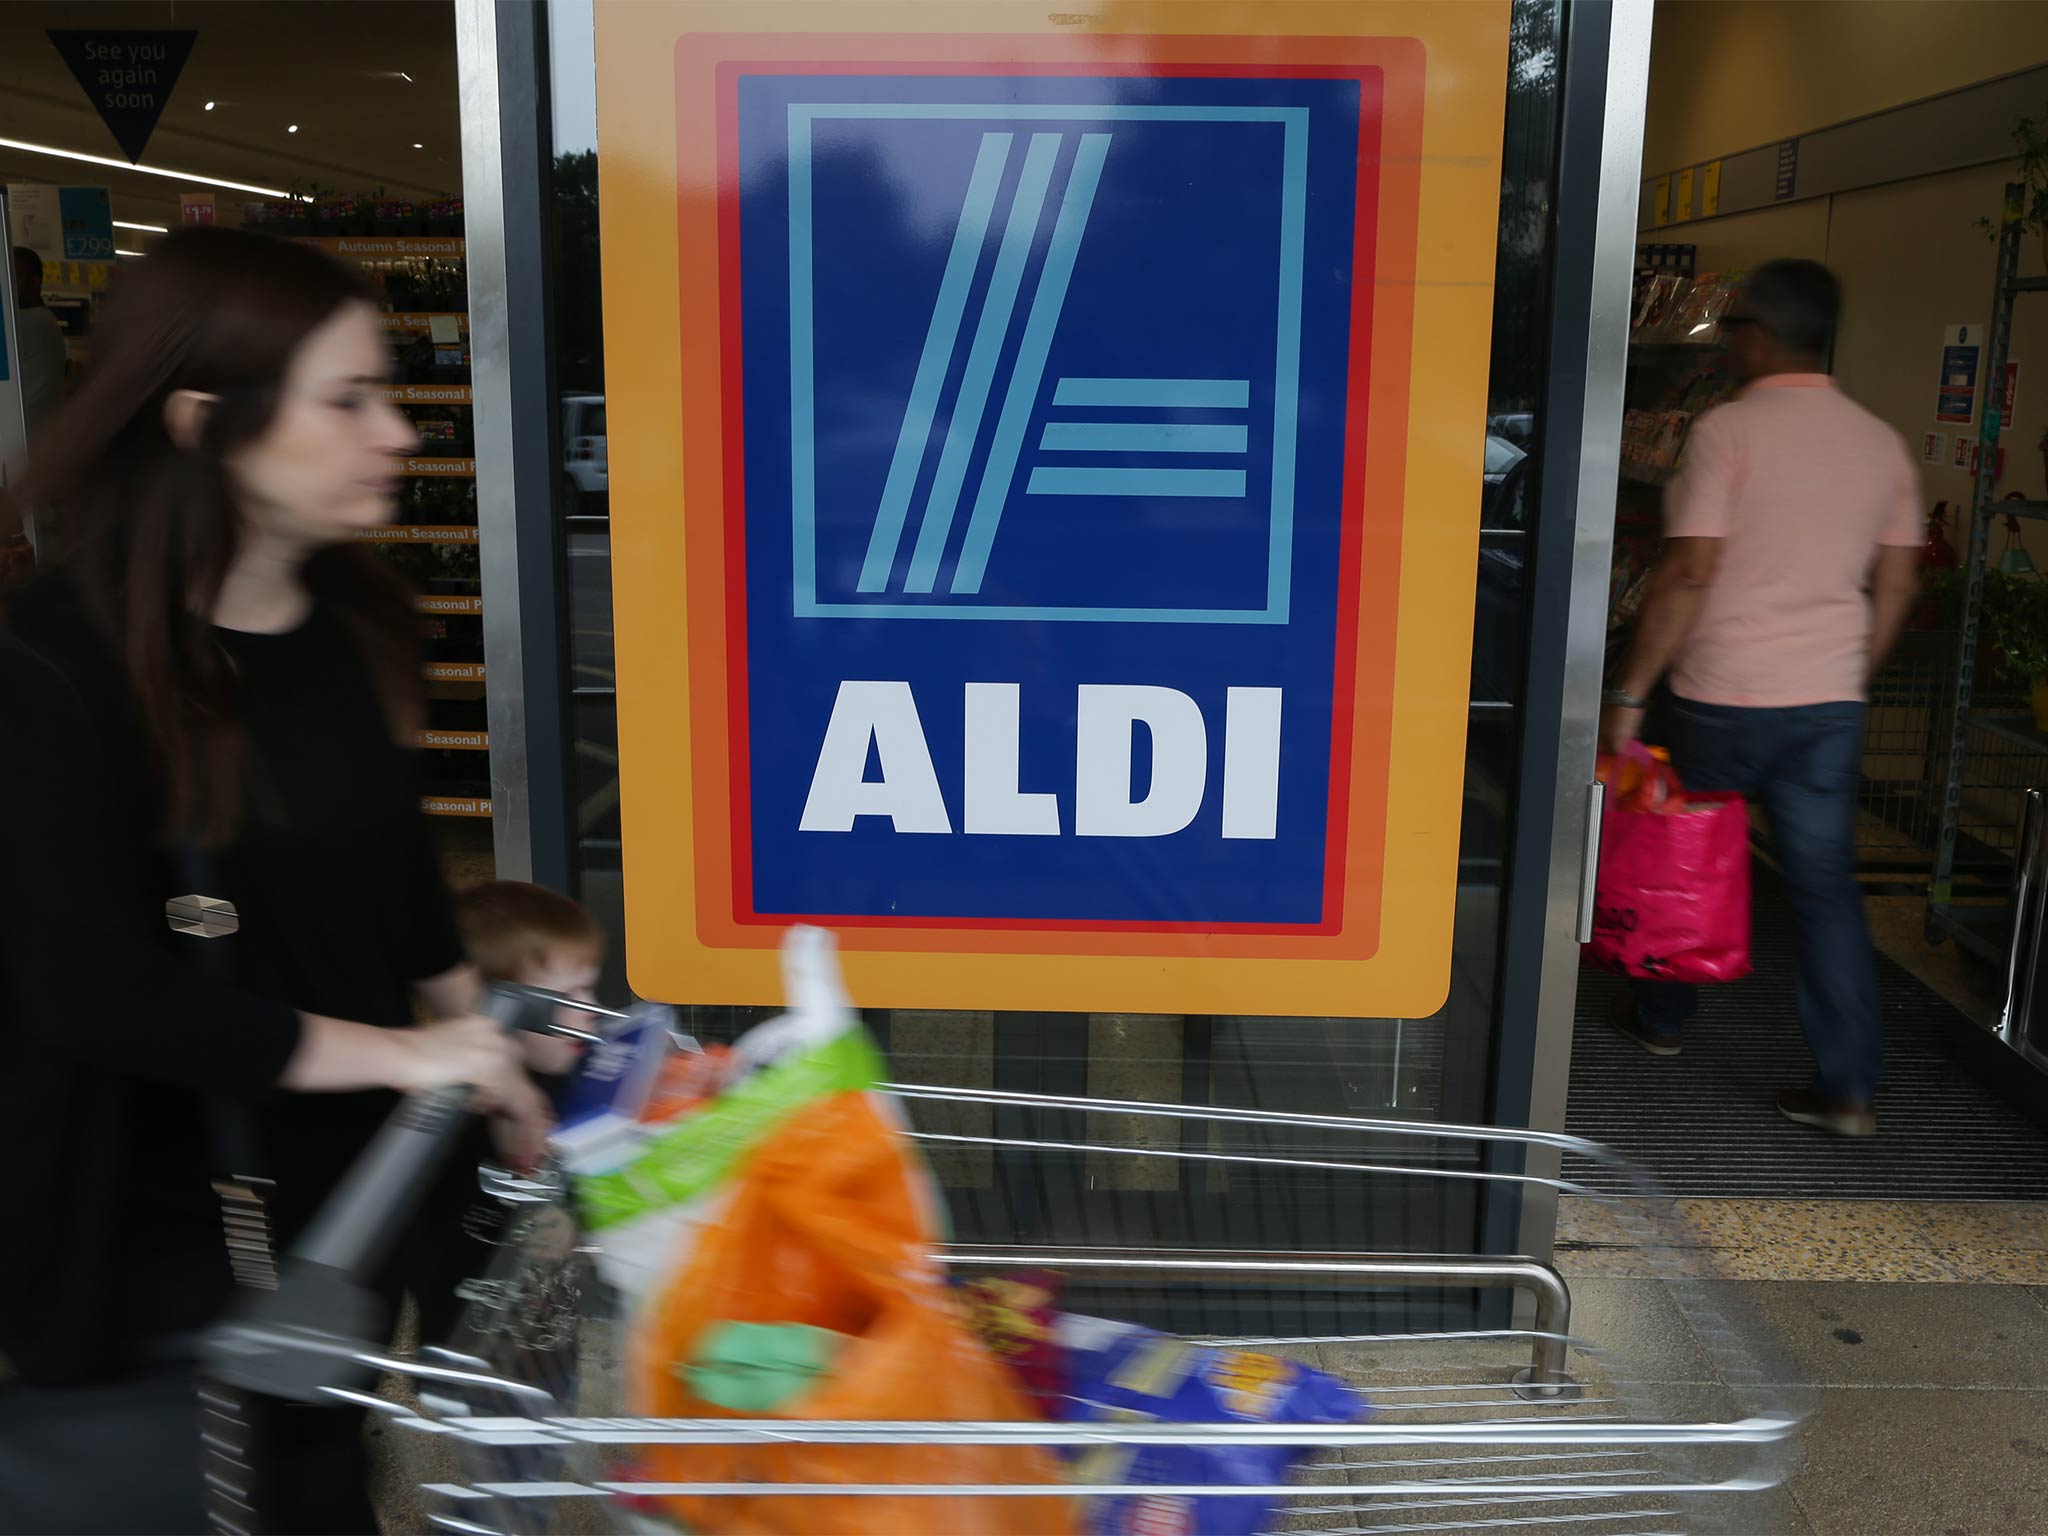 Aldi's 6.9 per cent share of the market is more than Co-op, Waitrose and Lidl